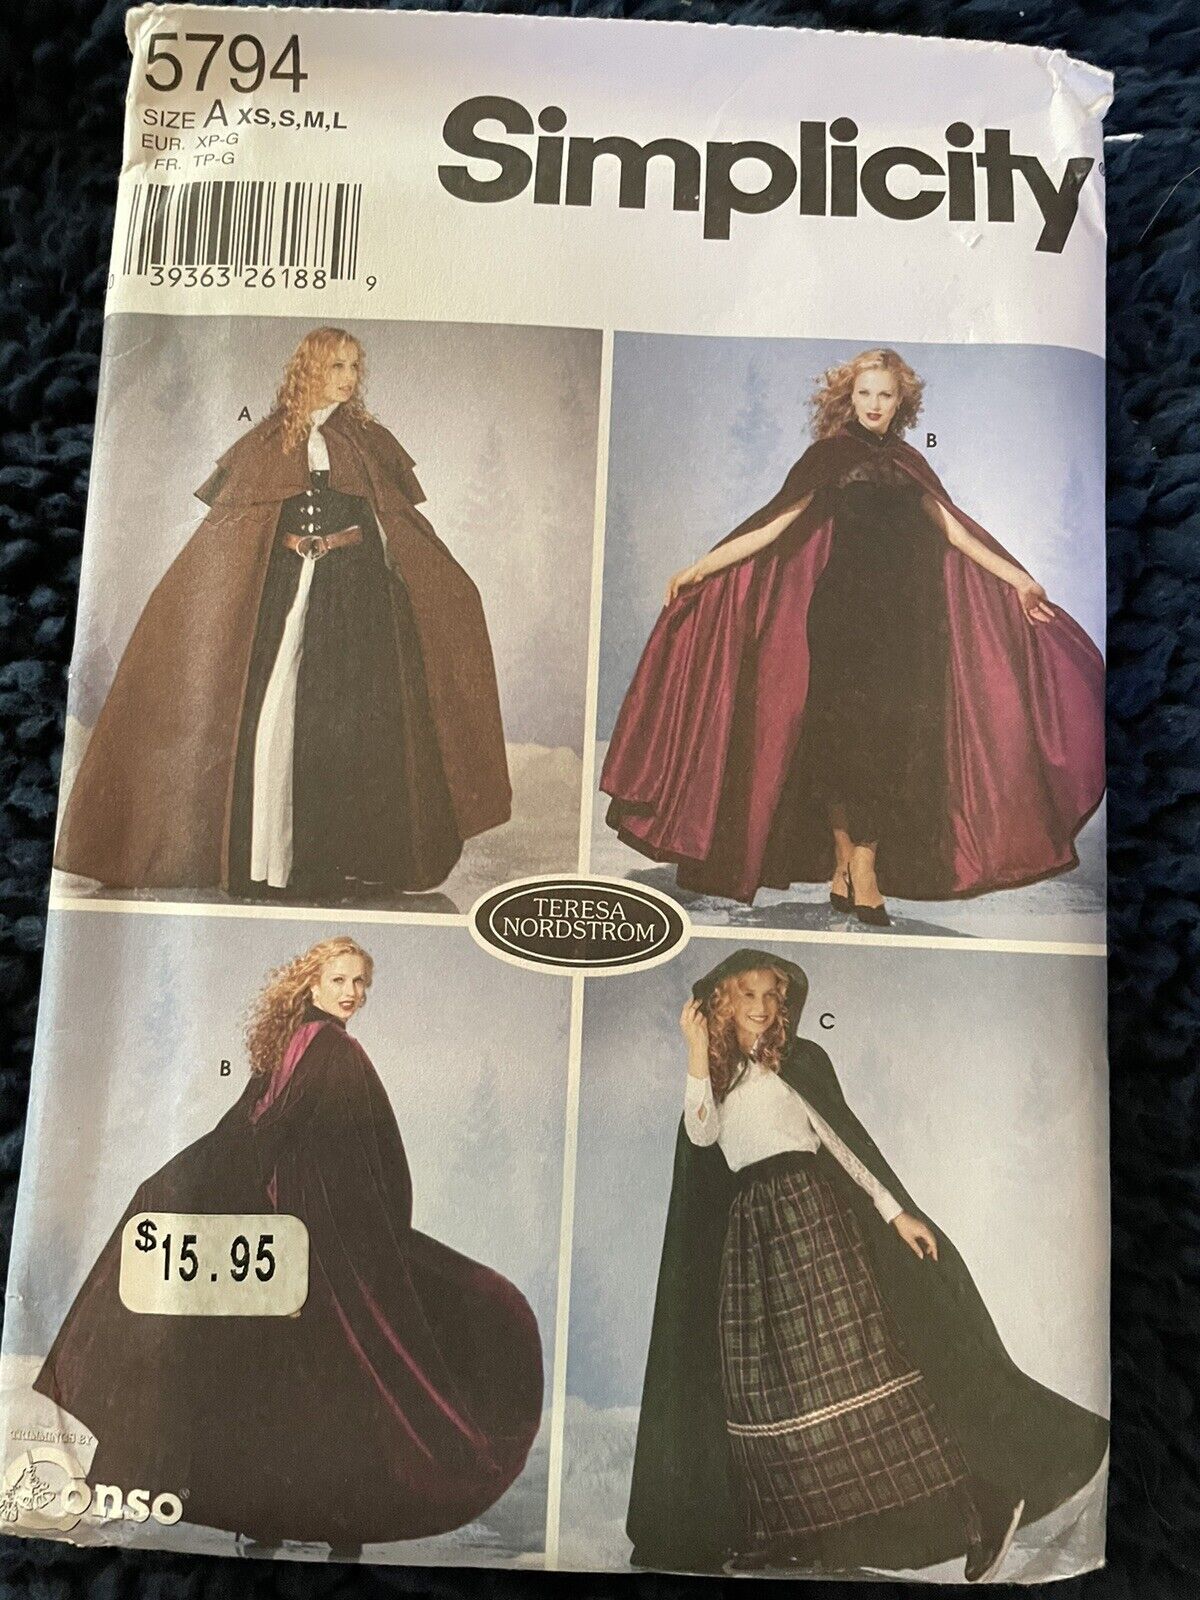 Costume Cape Sewing Pattern New